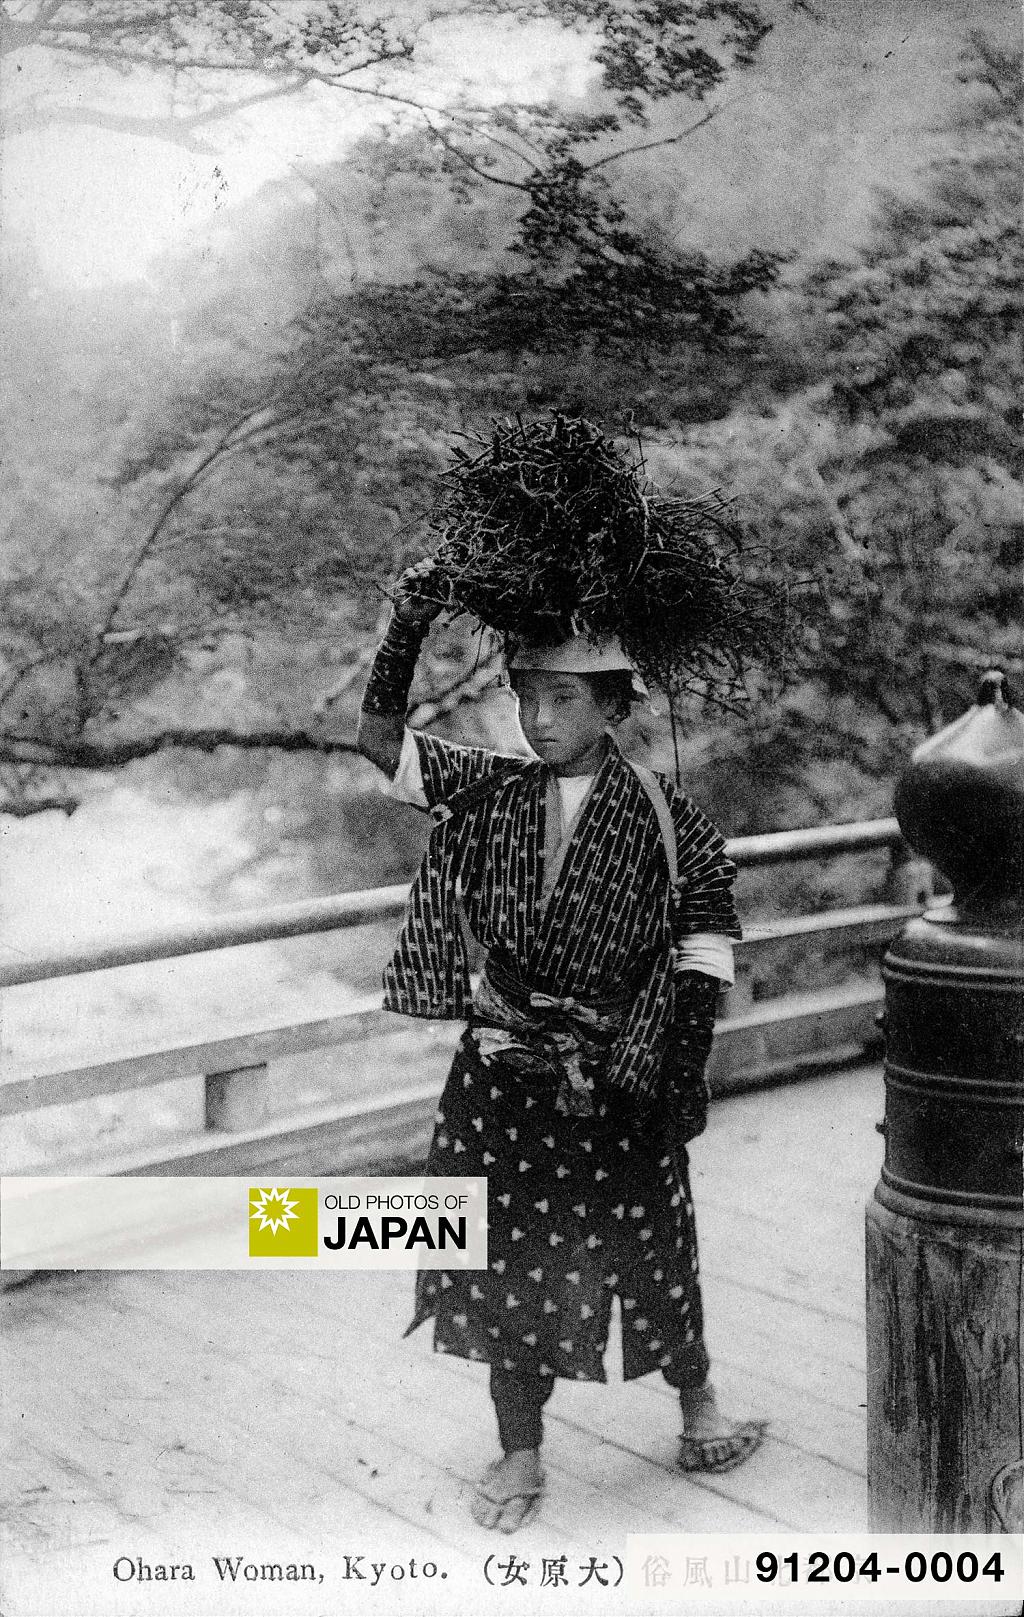 91204-0004 - Japanese Woman Carrying Firewood, 1910s